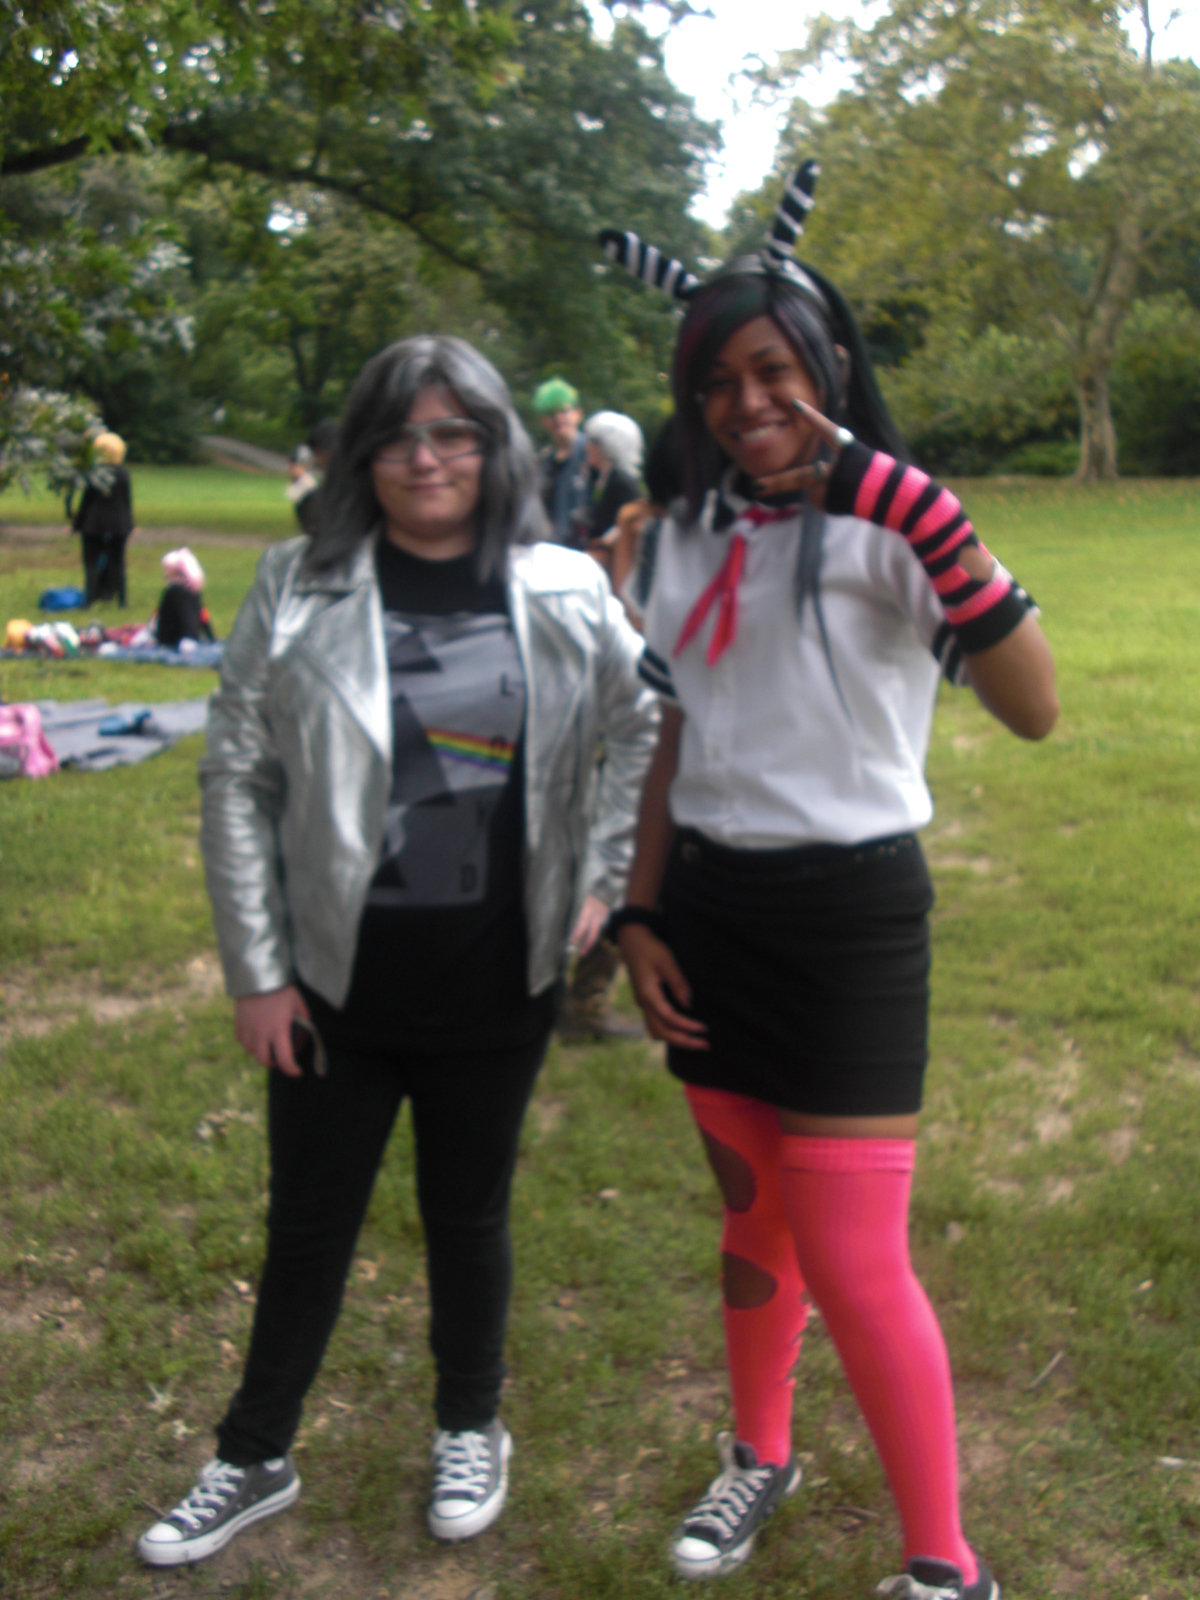 At the Cosplay Event in Central Park 2014 with a friend.